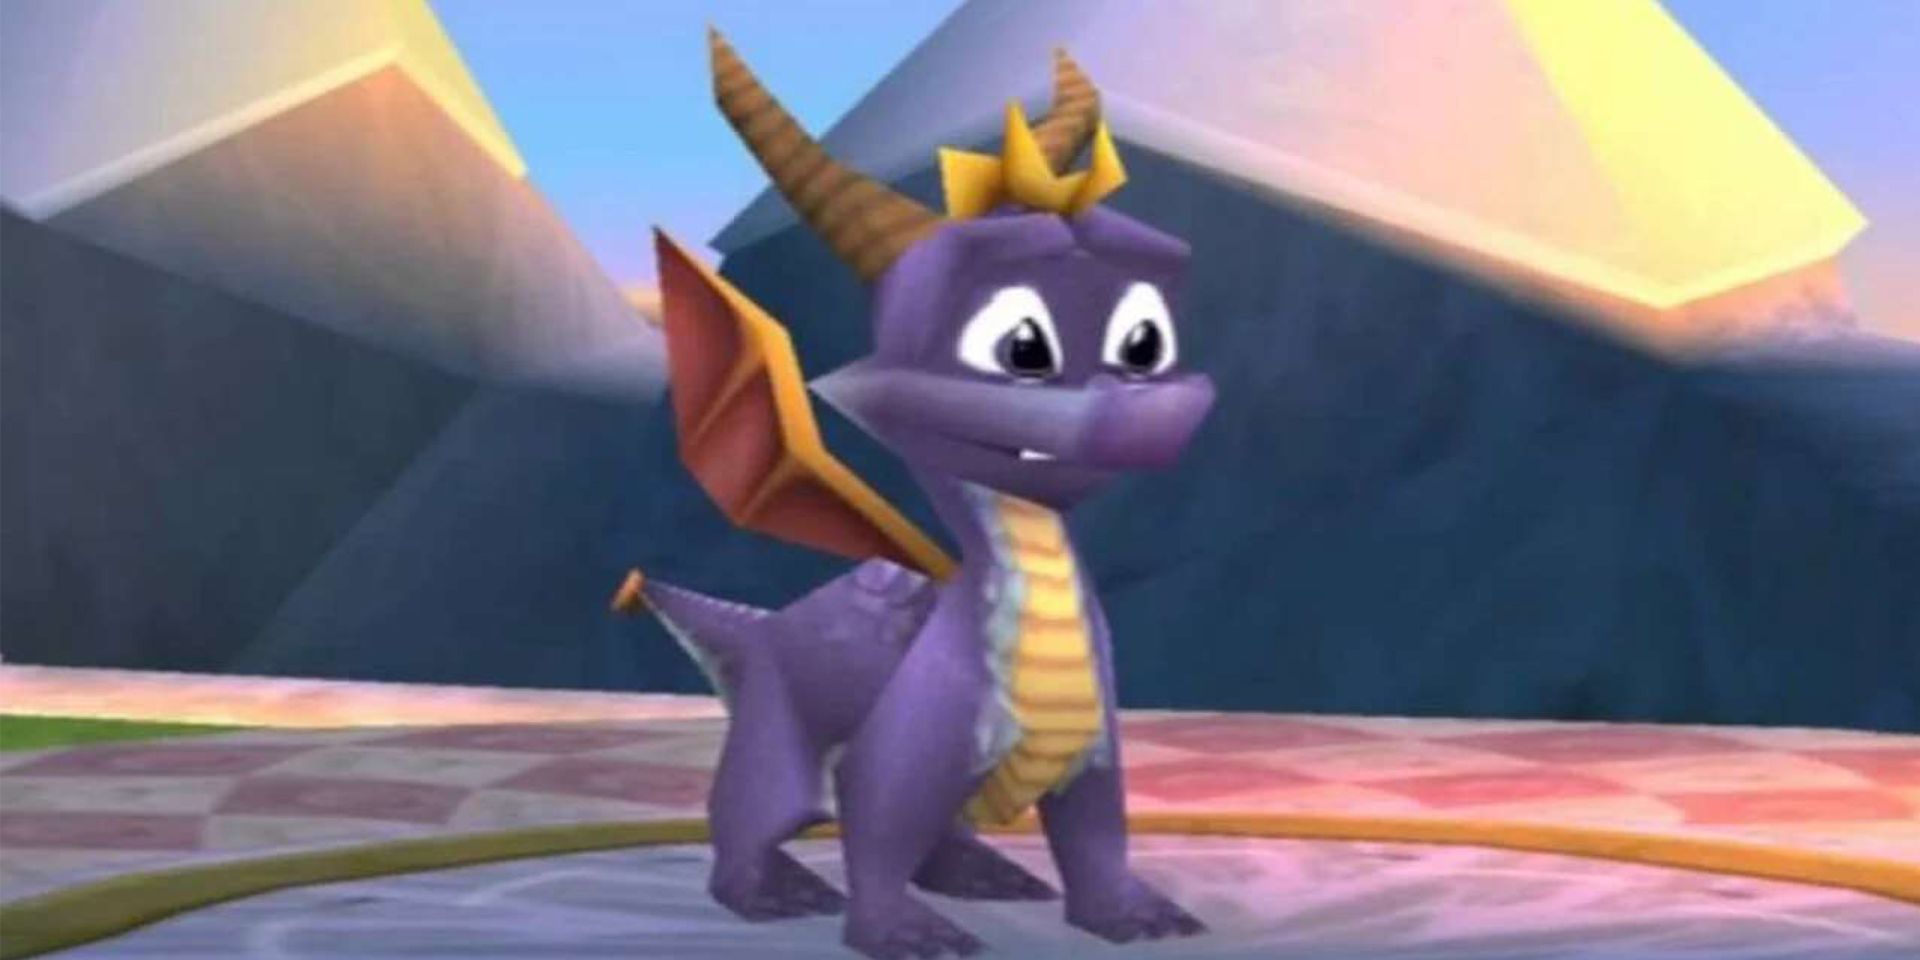 Spyro the Dragon stands proudly at the title screen